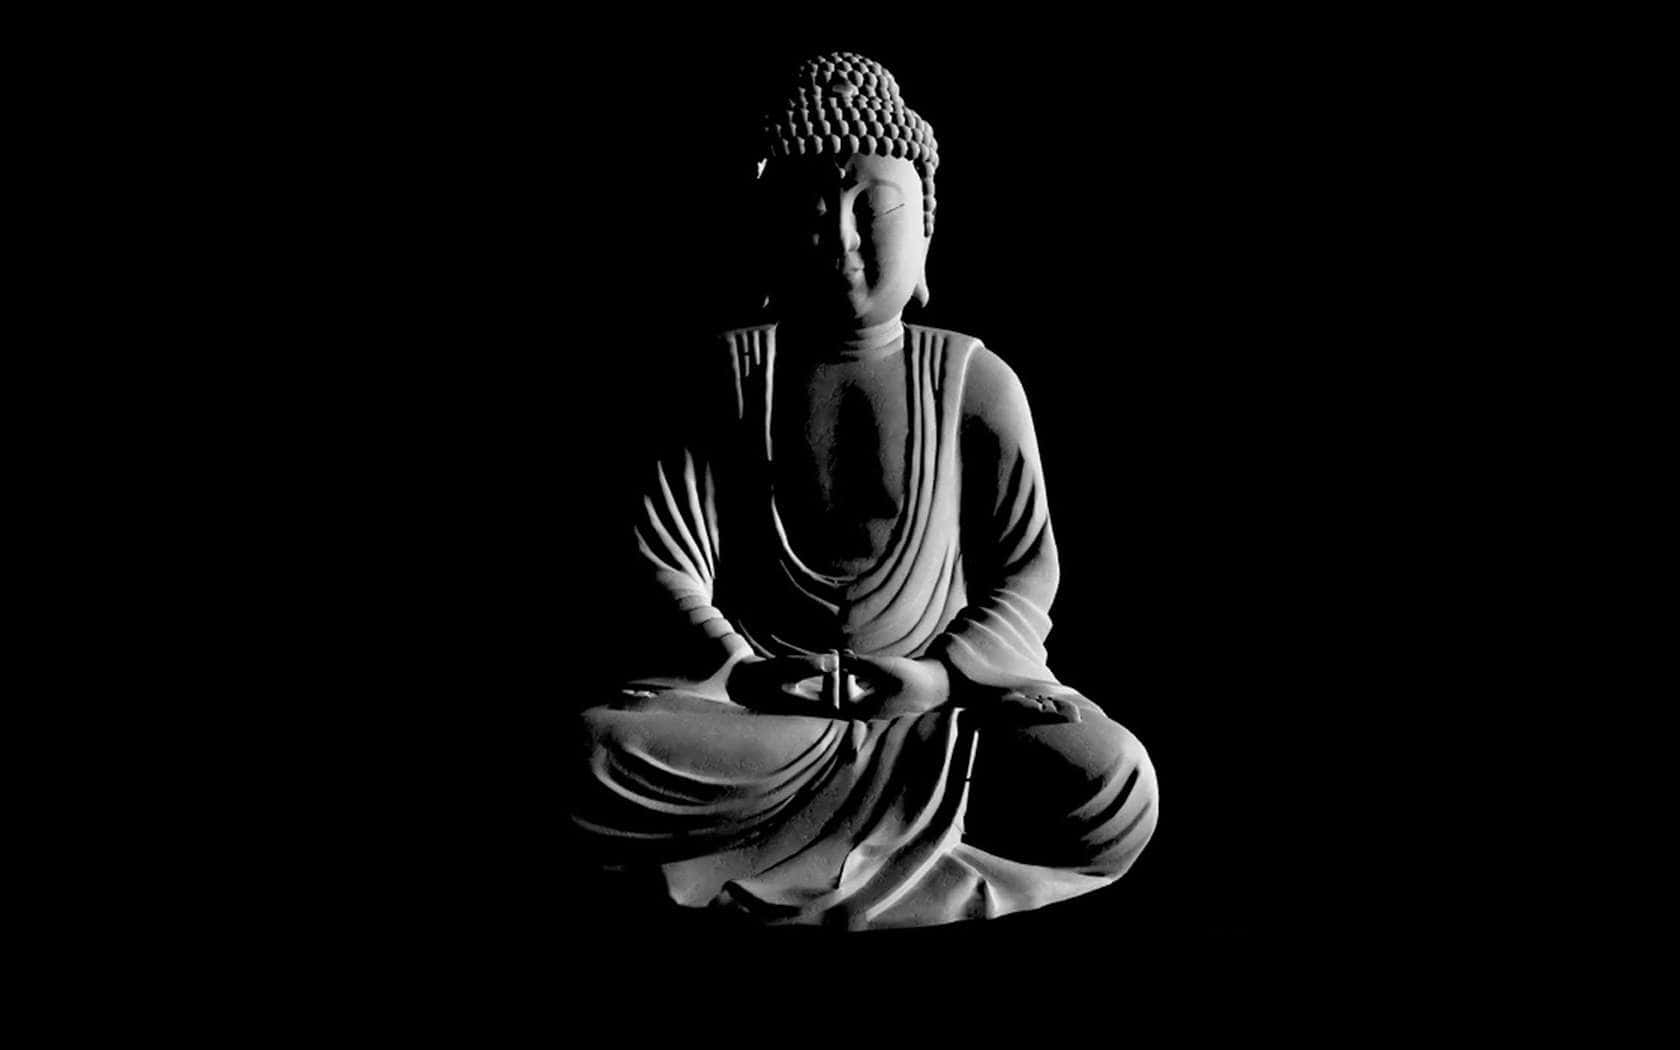 Find Serenity with This Calm and Peaceful Buddha Image